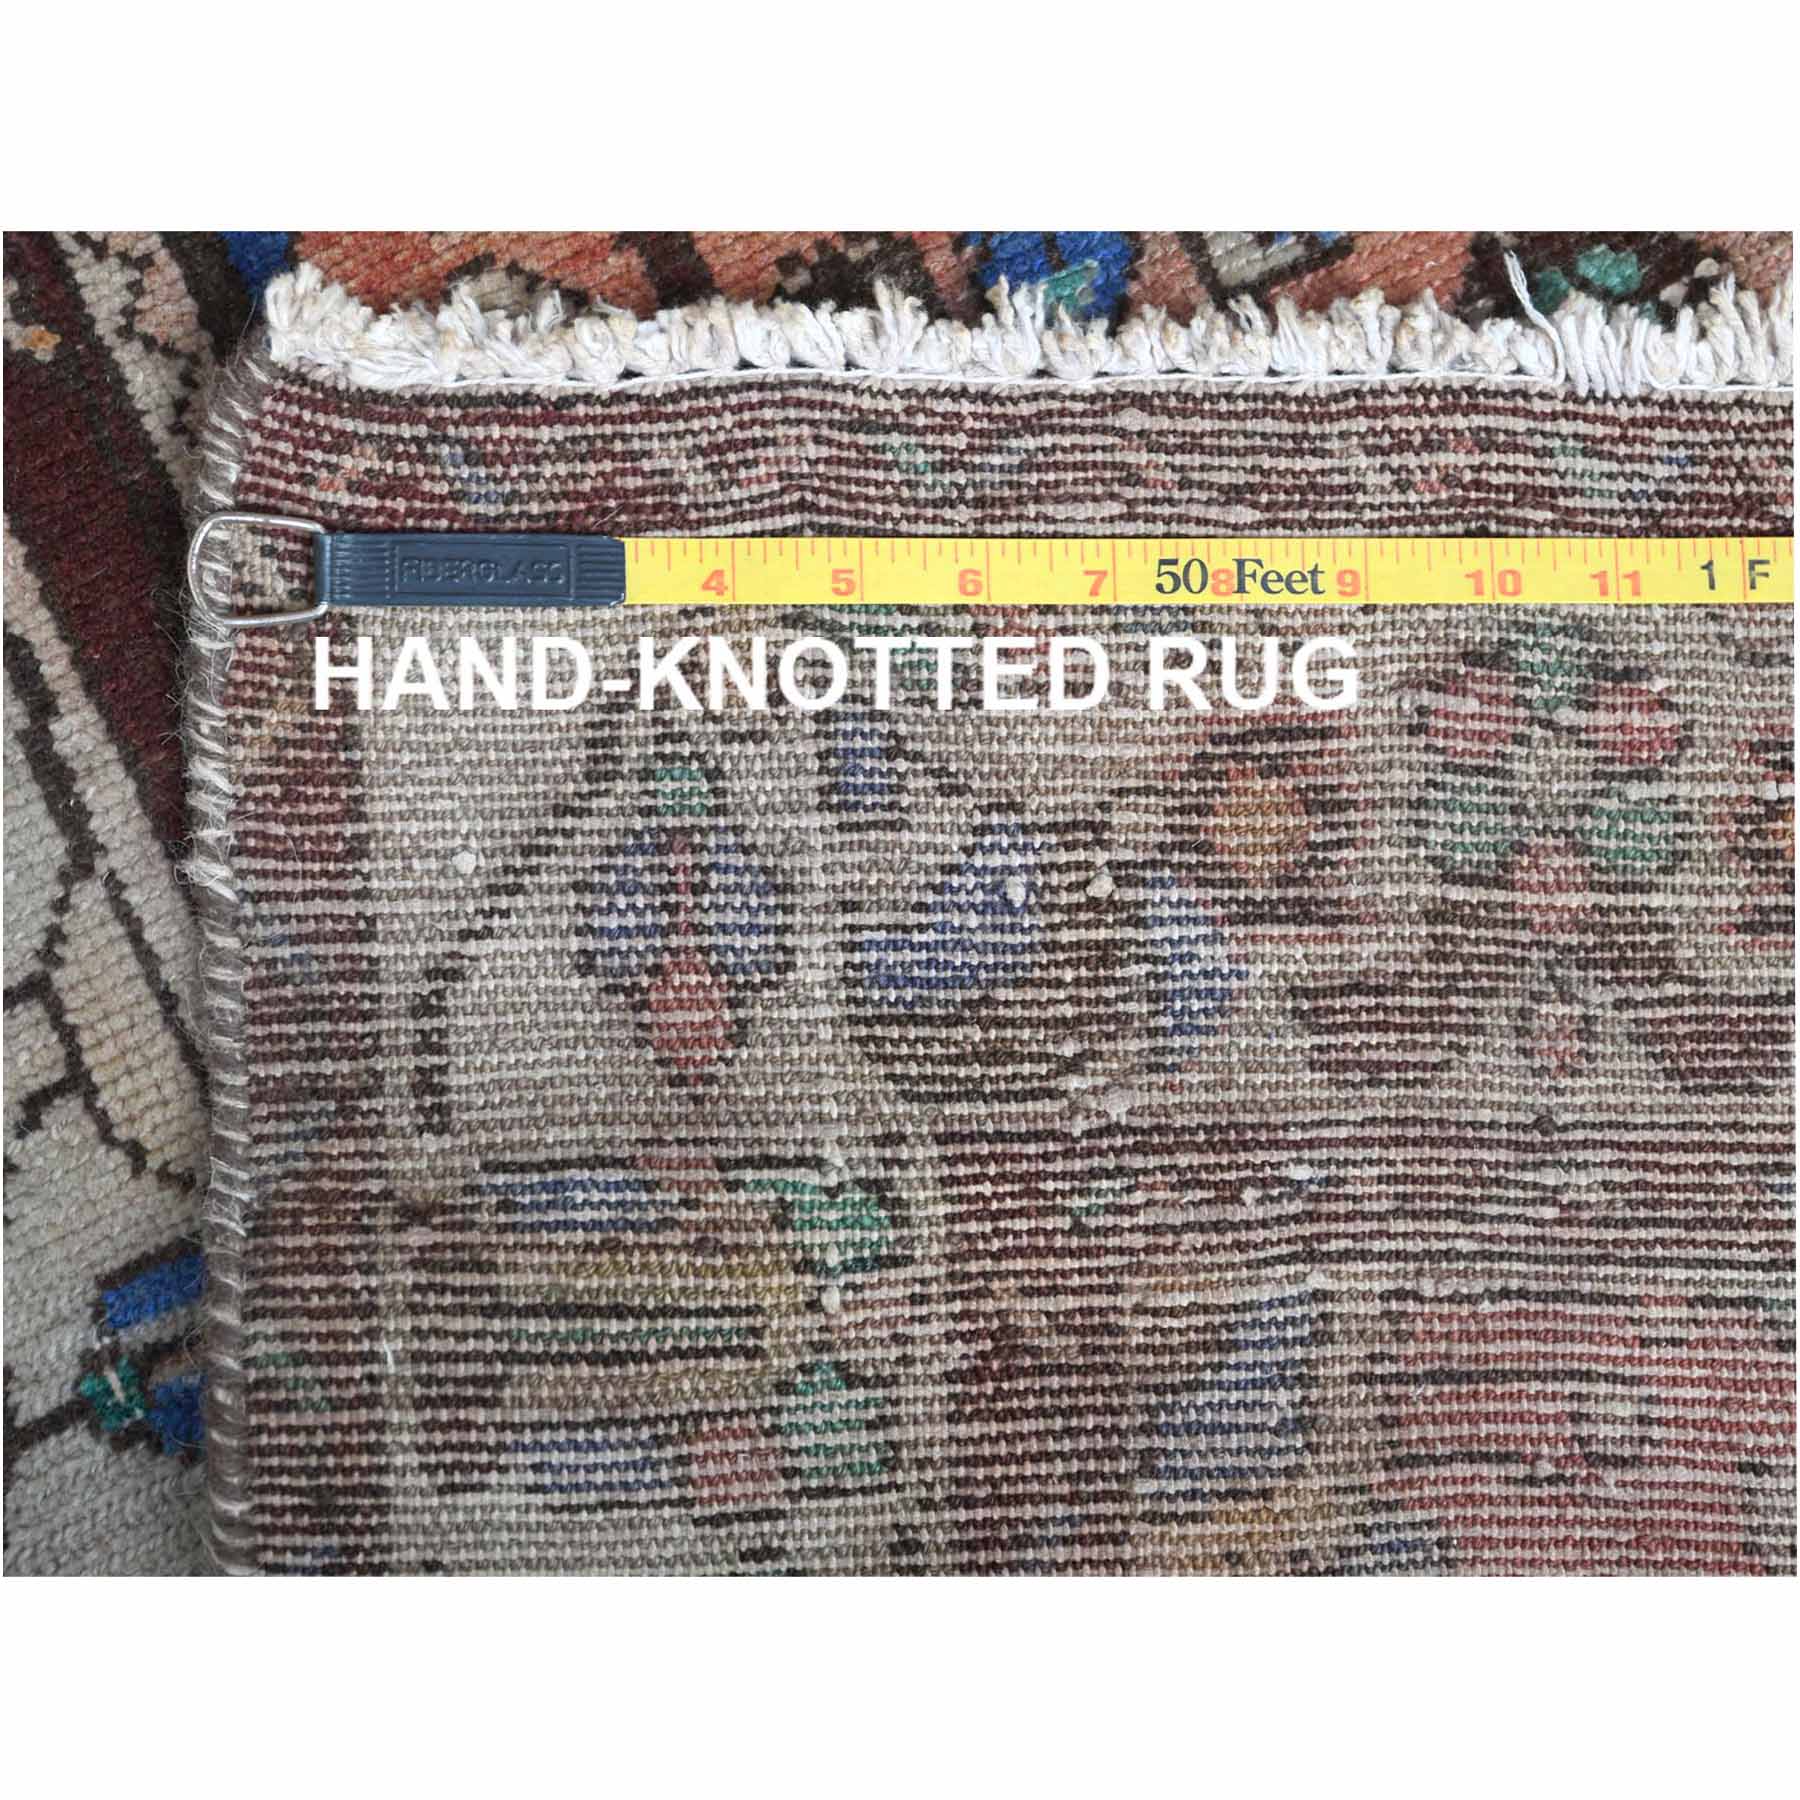 Overdyed-Vintage-Hand-Knotted-Rug-309300